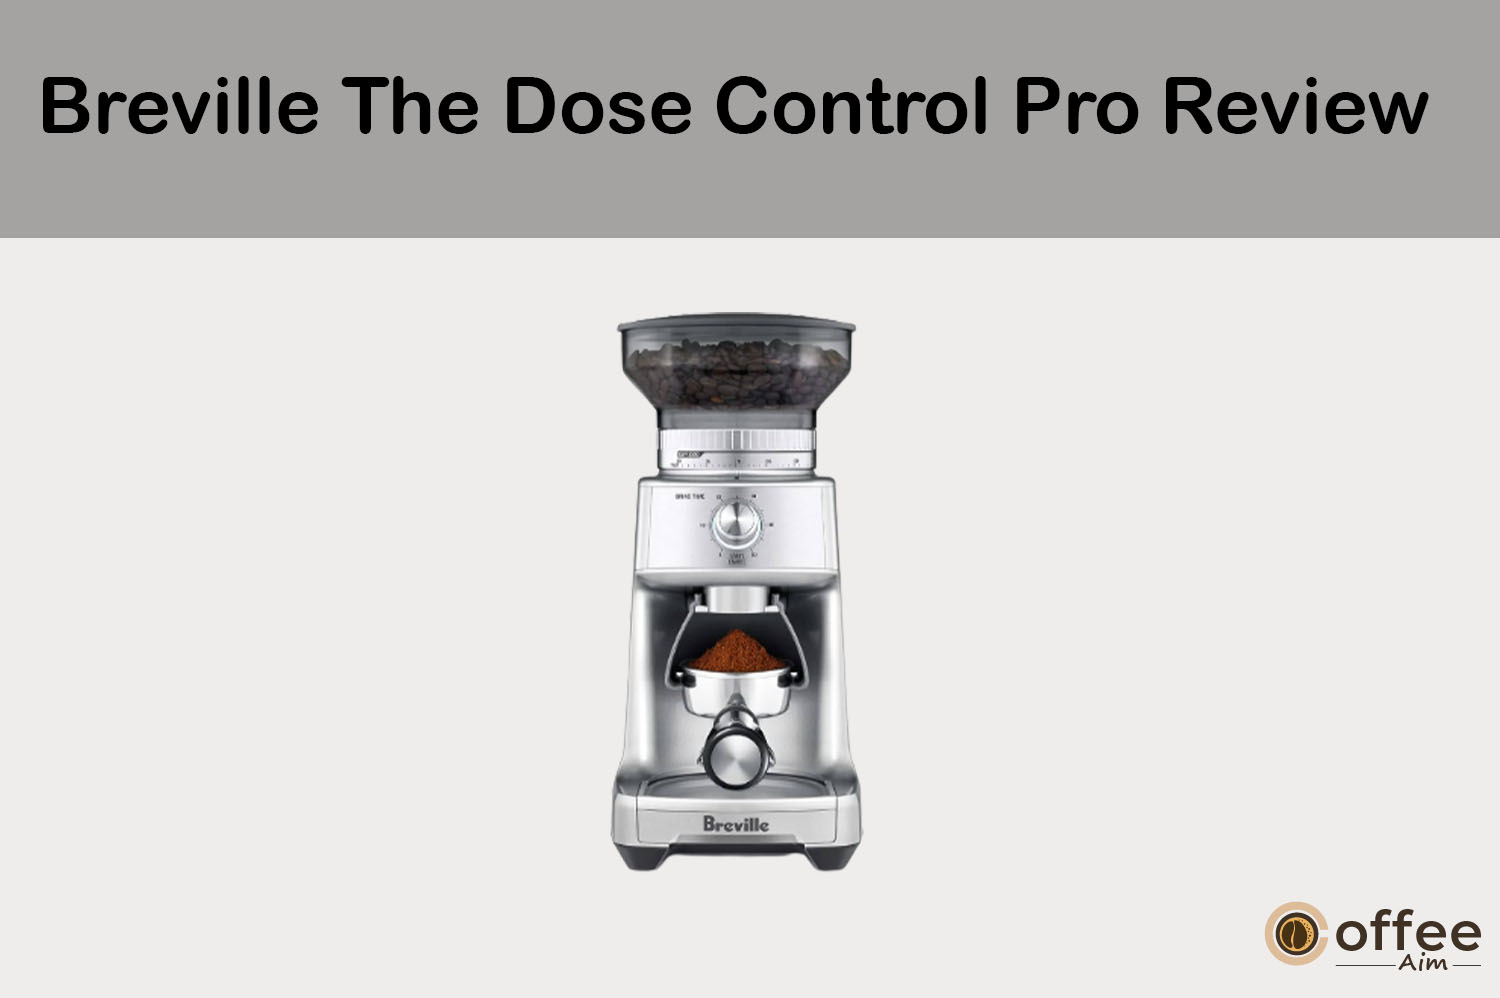 Featured-image-of-''Breville-The-Dose-Control-Pro-Review''.